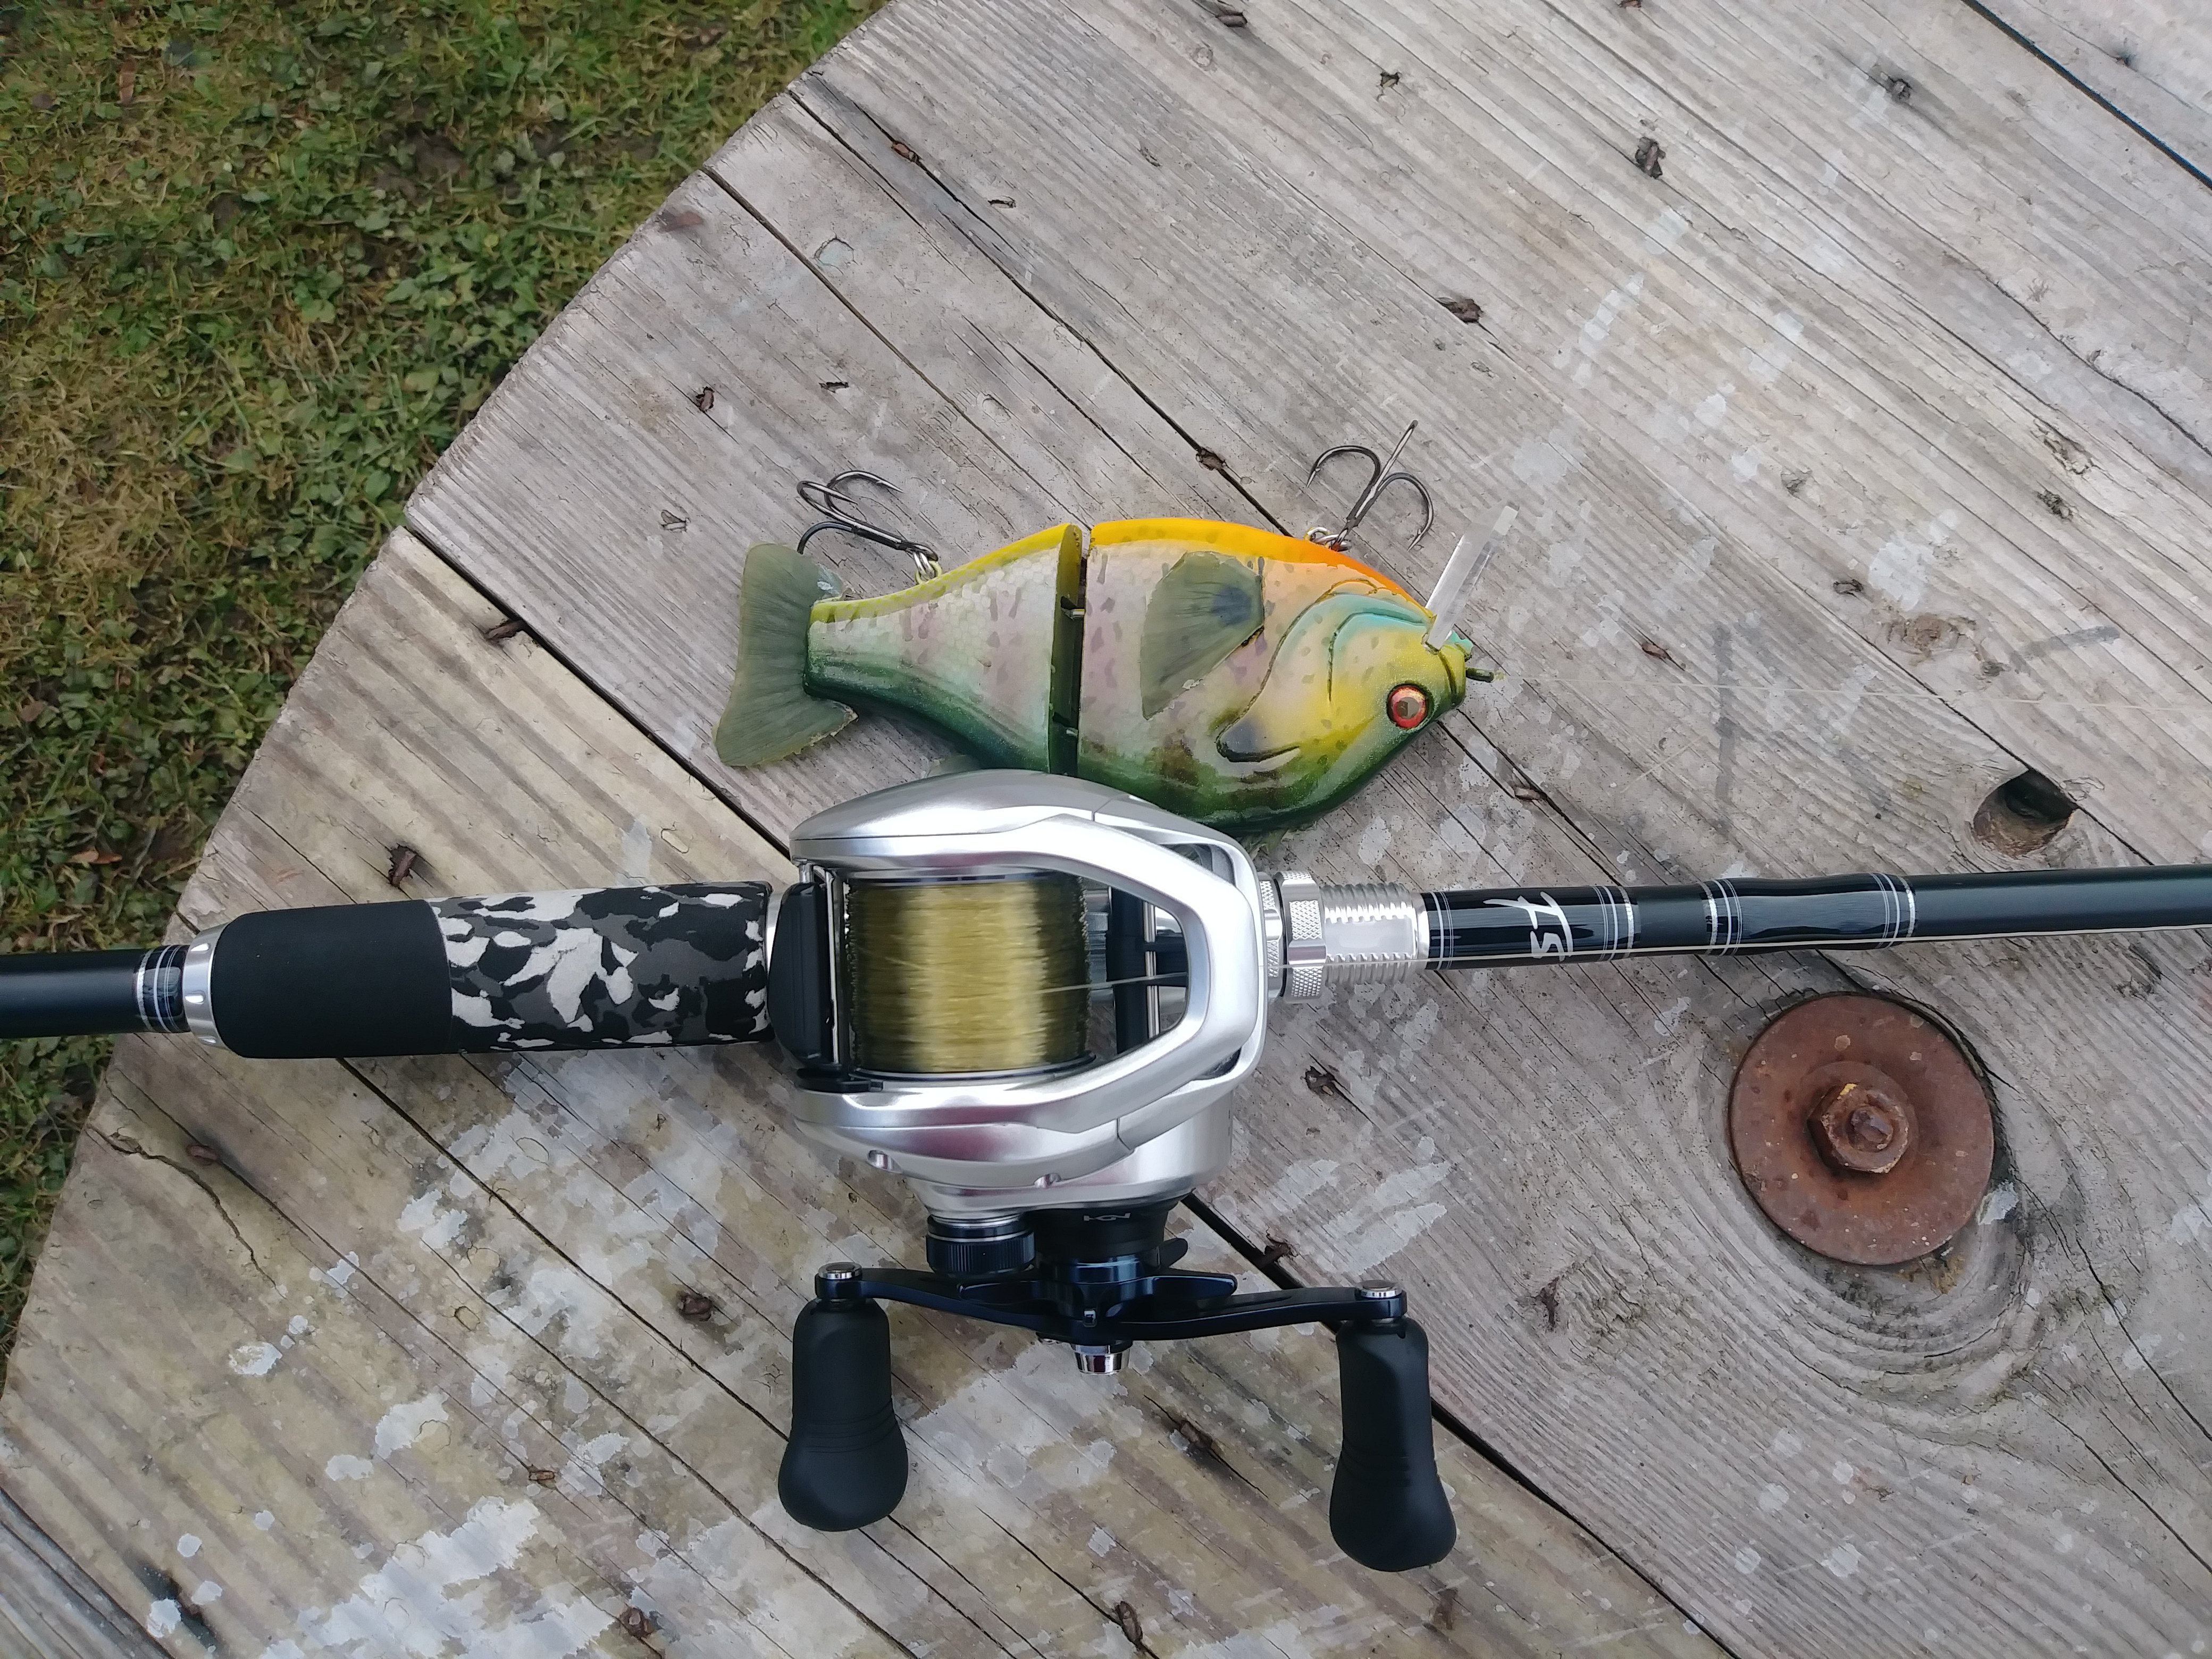 Show Off Your Swimbait Setup - Page 25 - The Underground